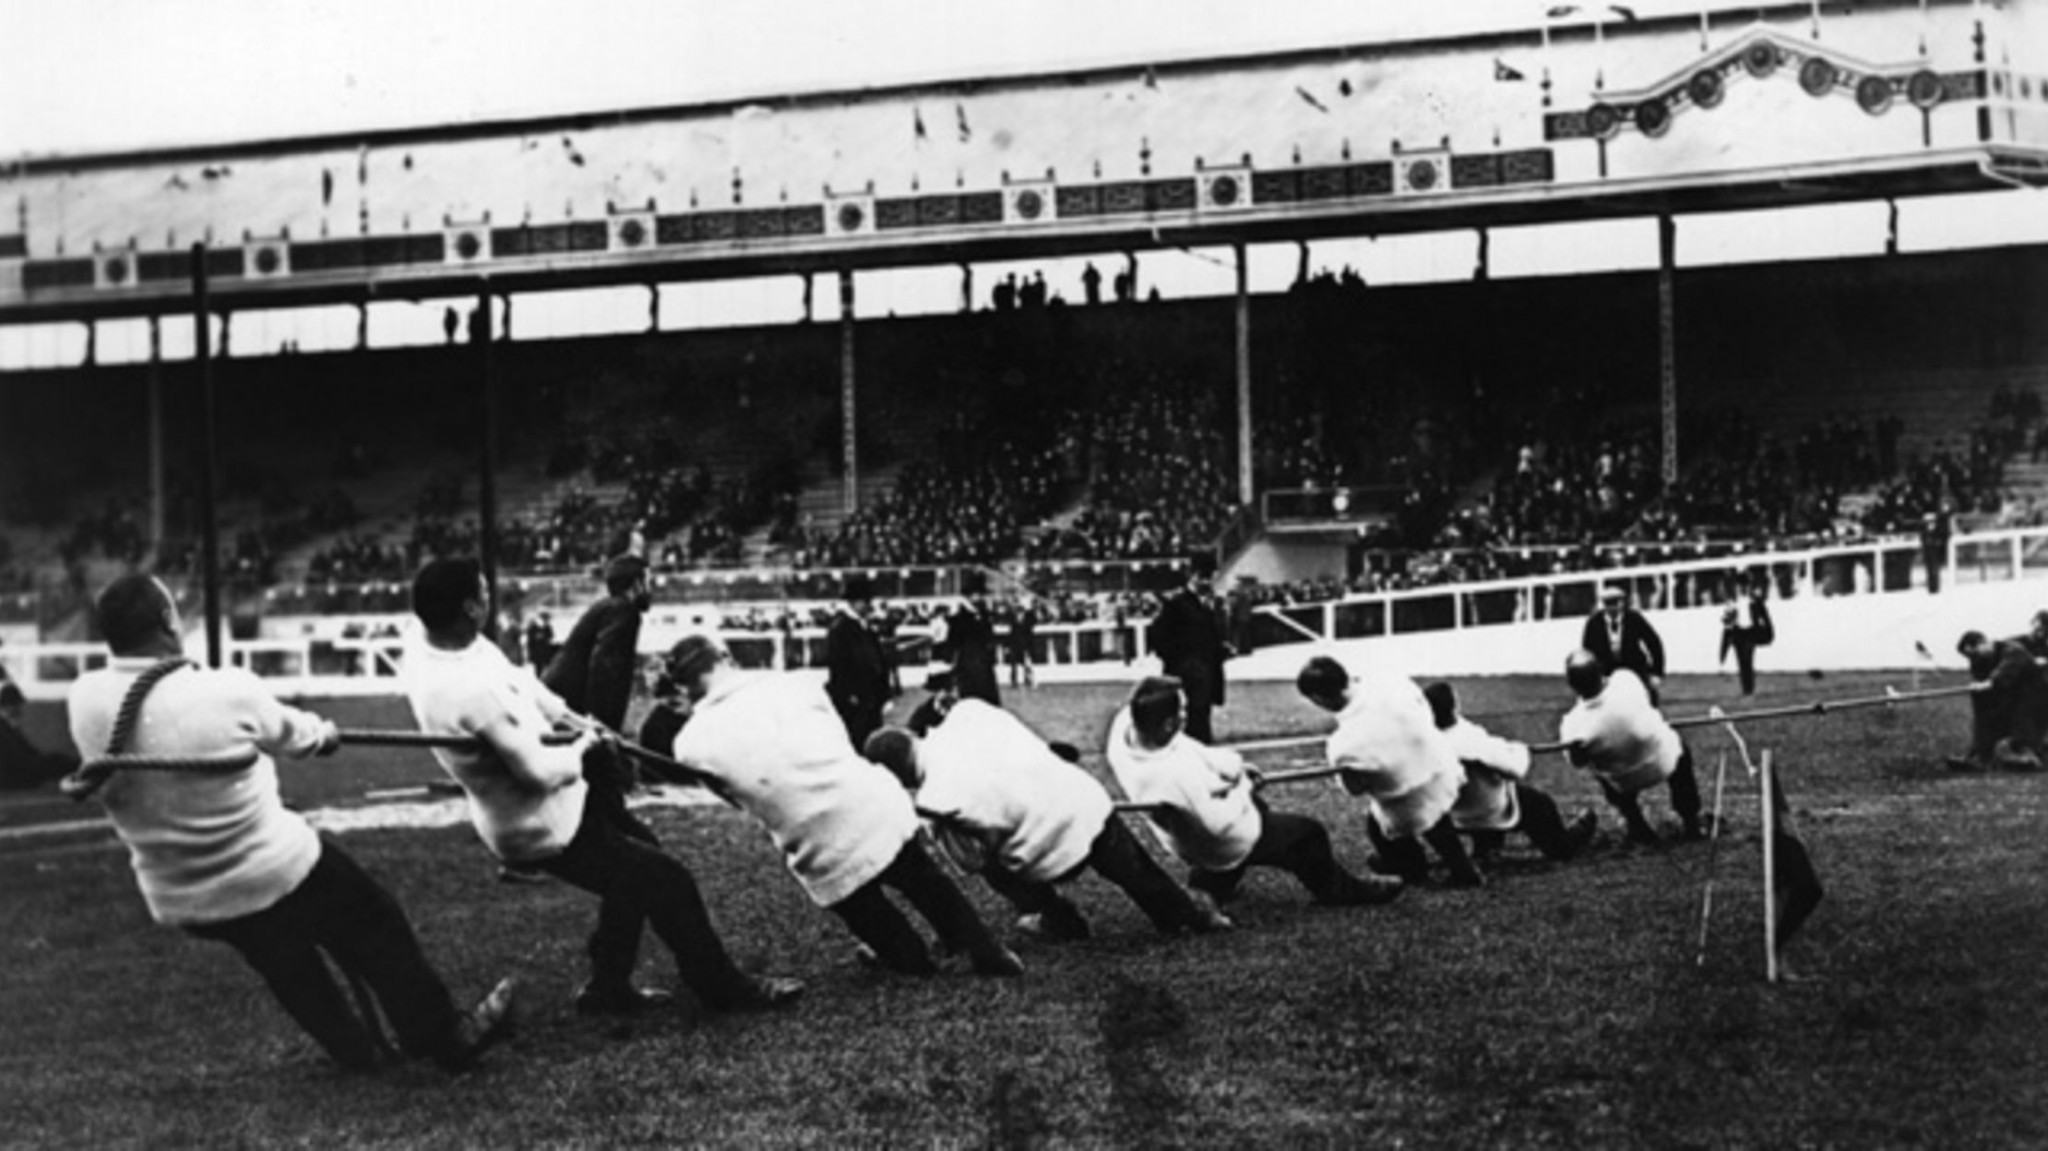 Tug of war appeared in every Olympic Games from Paris 1900 to Antwerp 1920 ©Getty Images